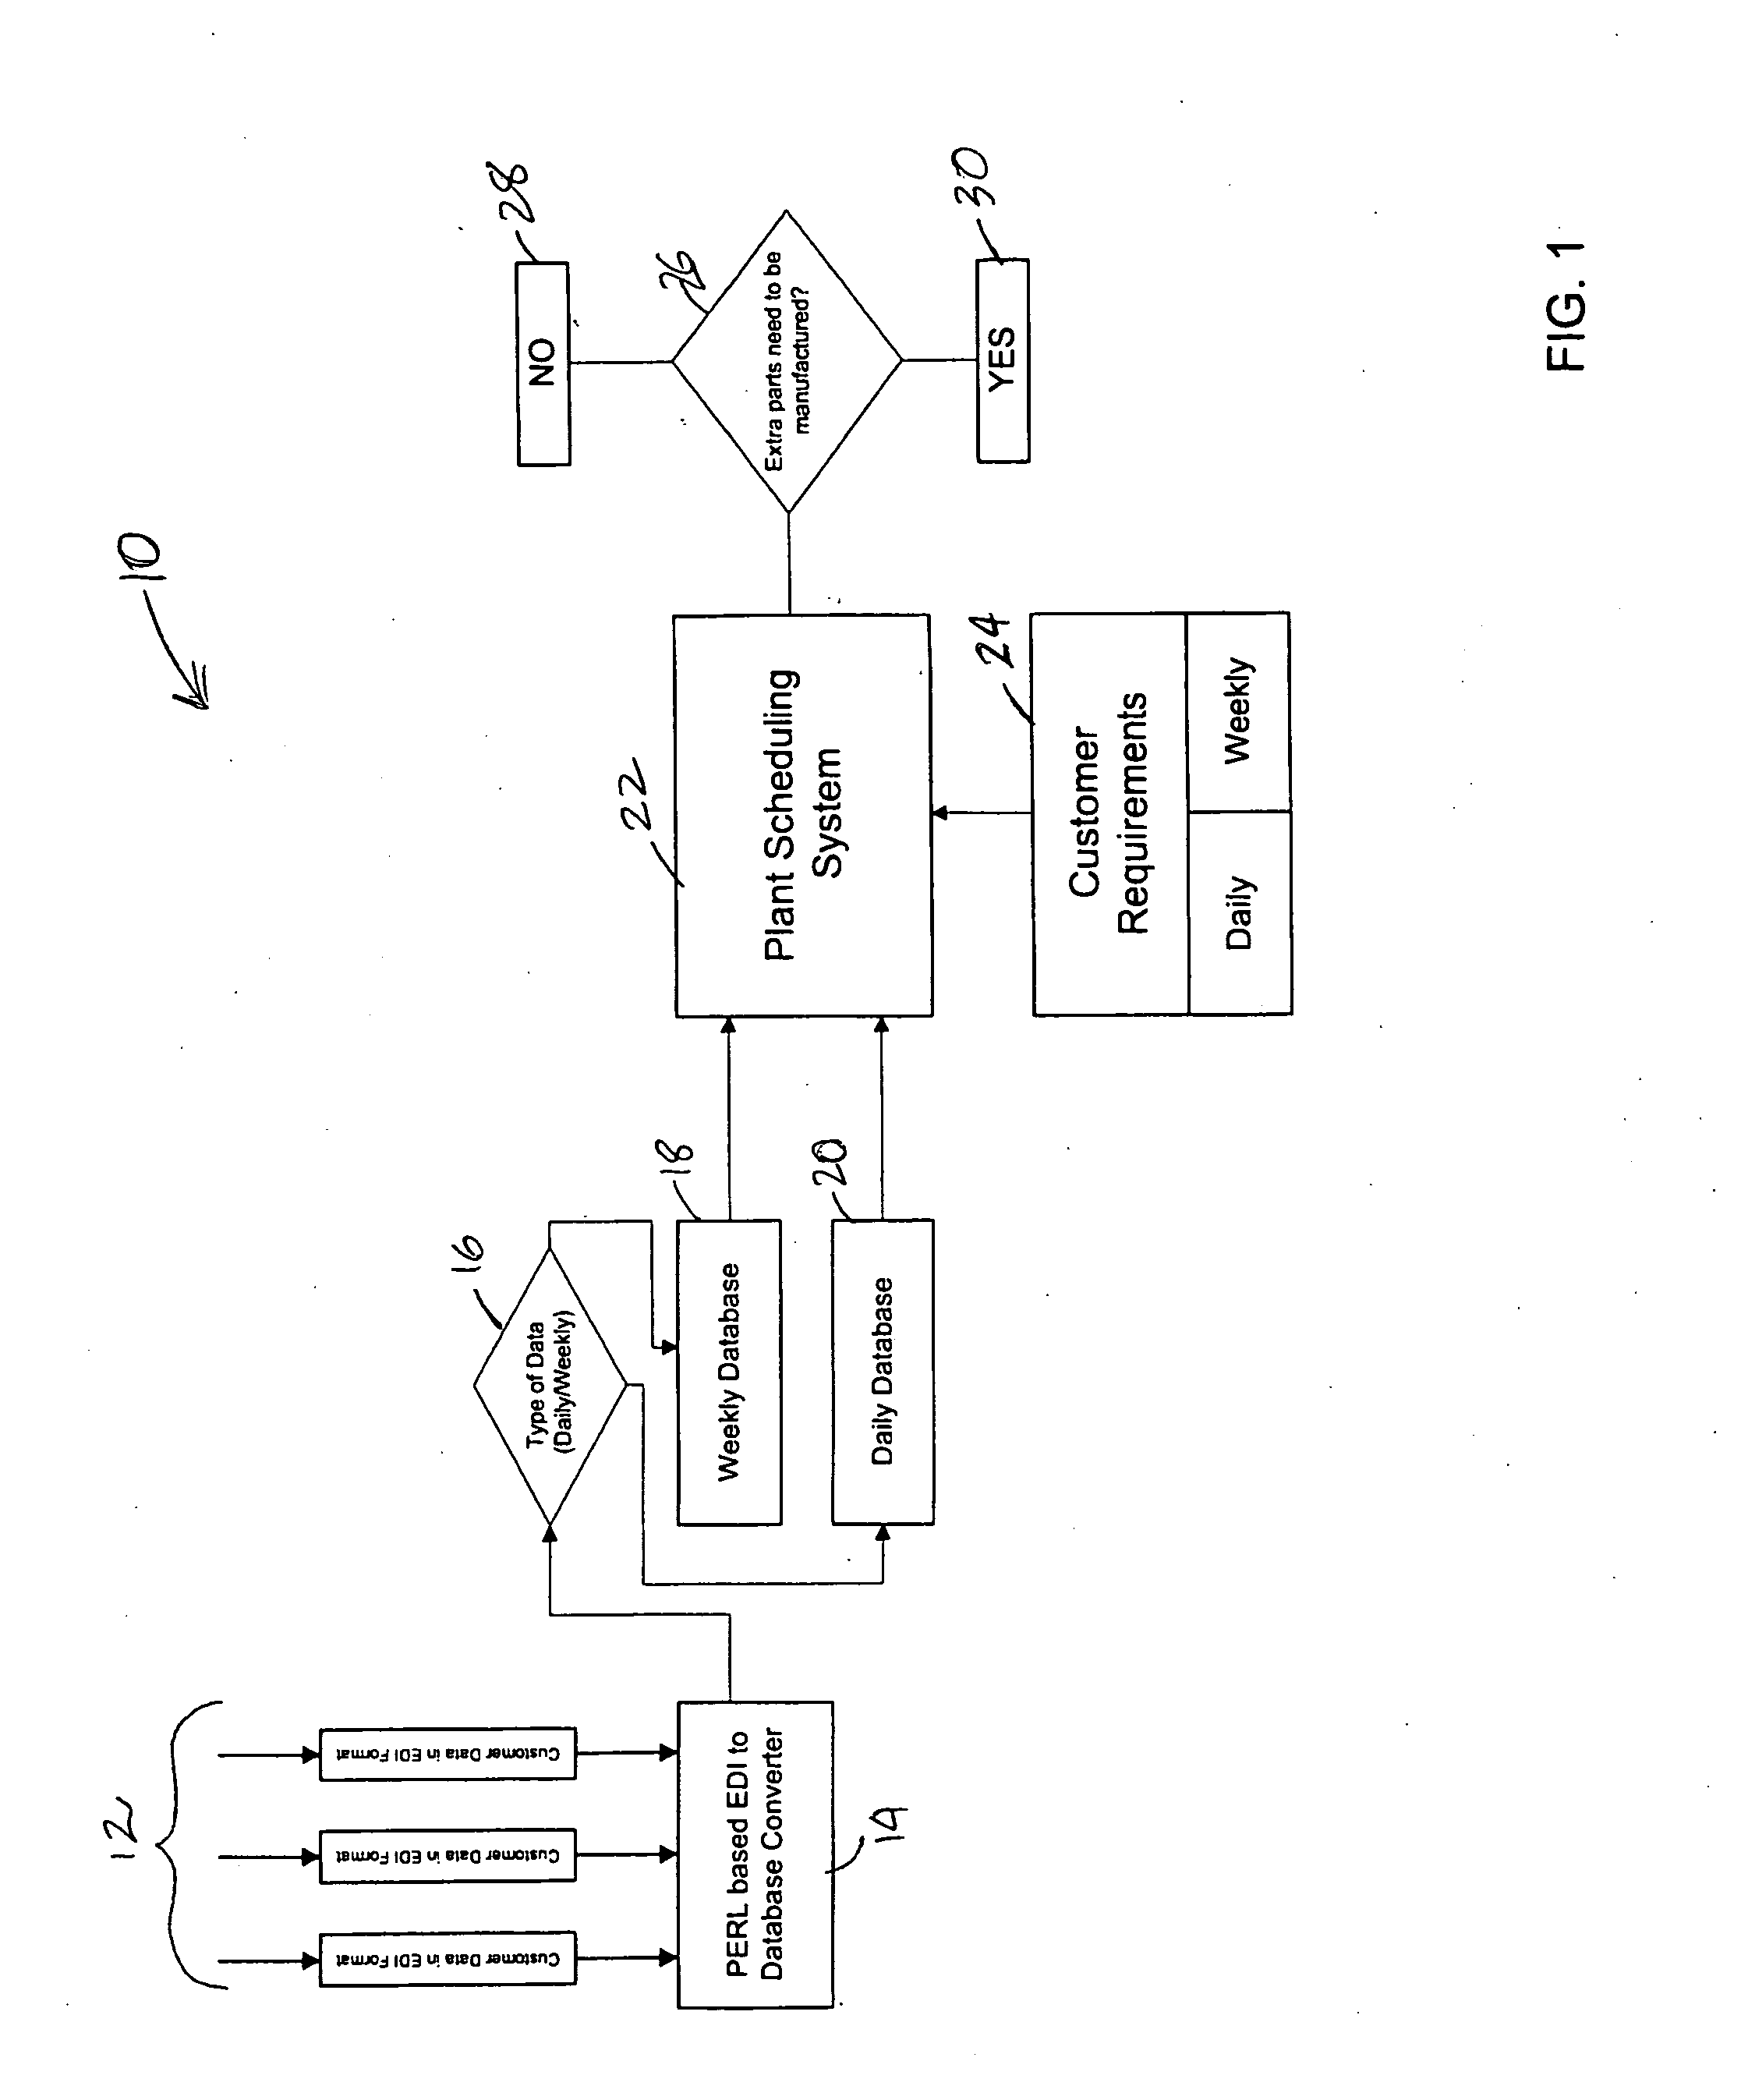 Method for processing Electronic Data Interchange (EDI) data from multiple customers